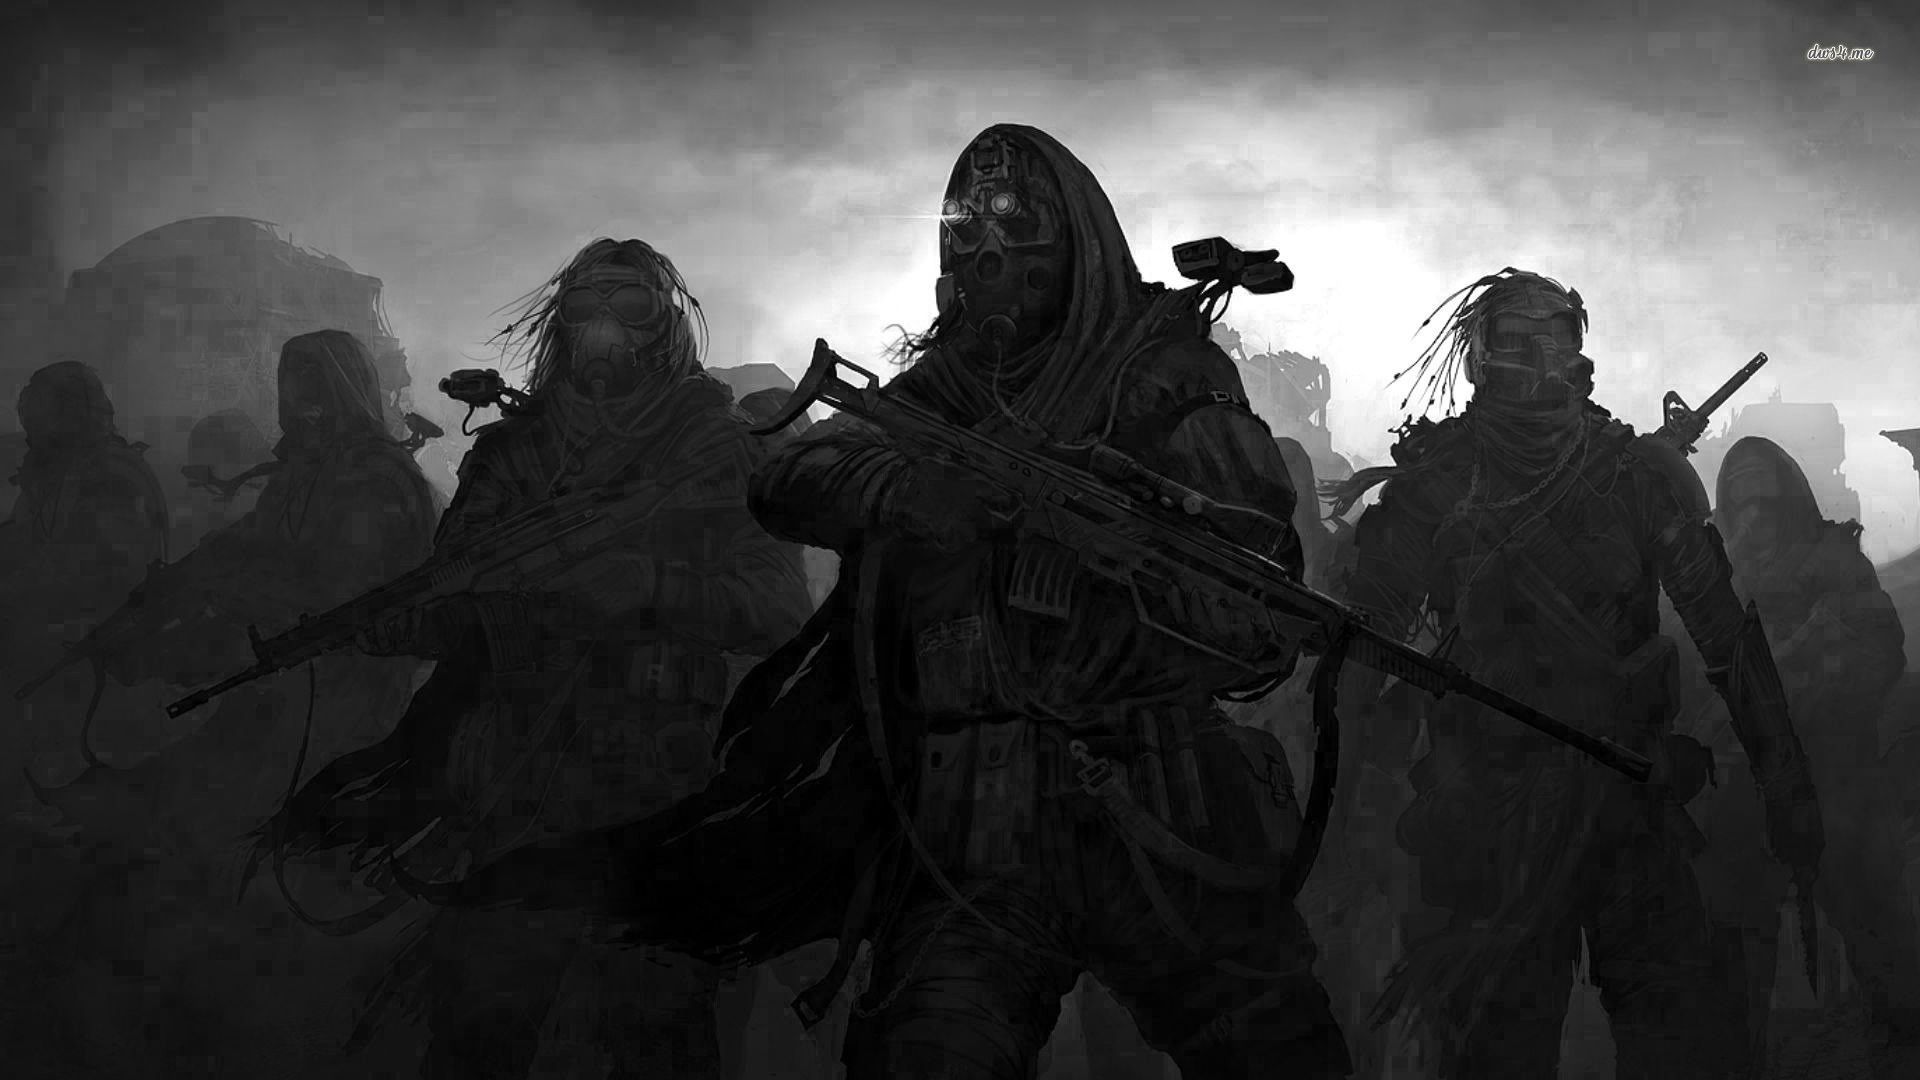 Soldiers with gas masks wallpaper - Digital Art wallpapers - #16168